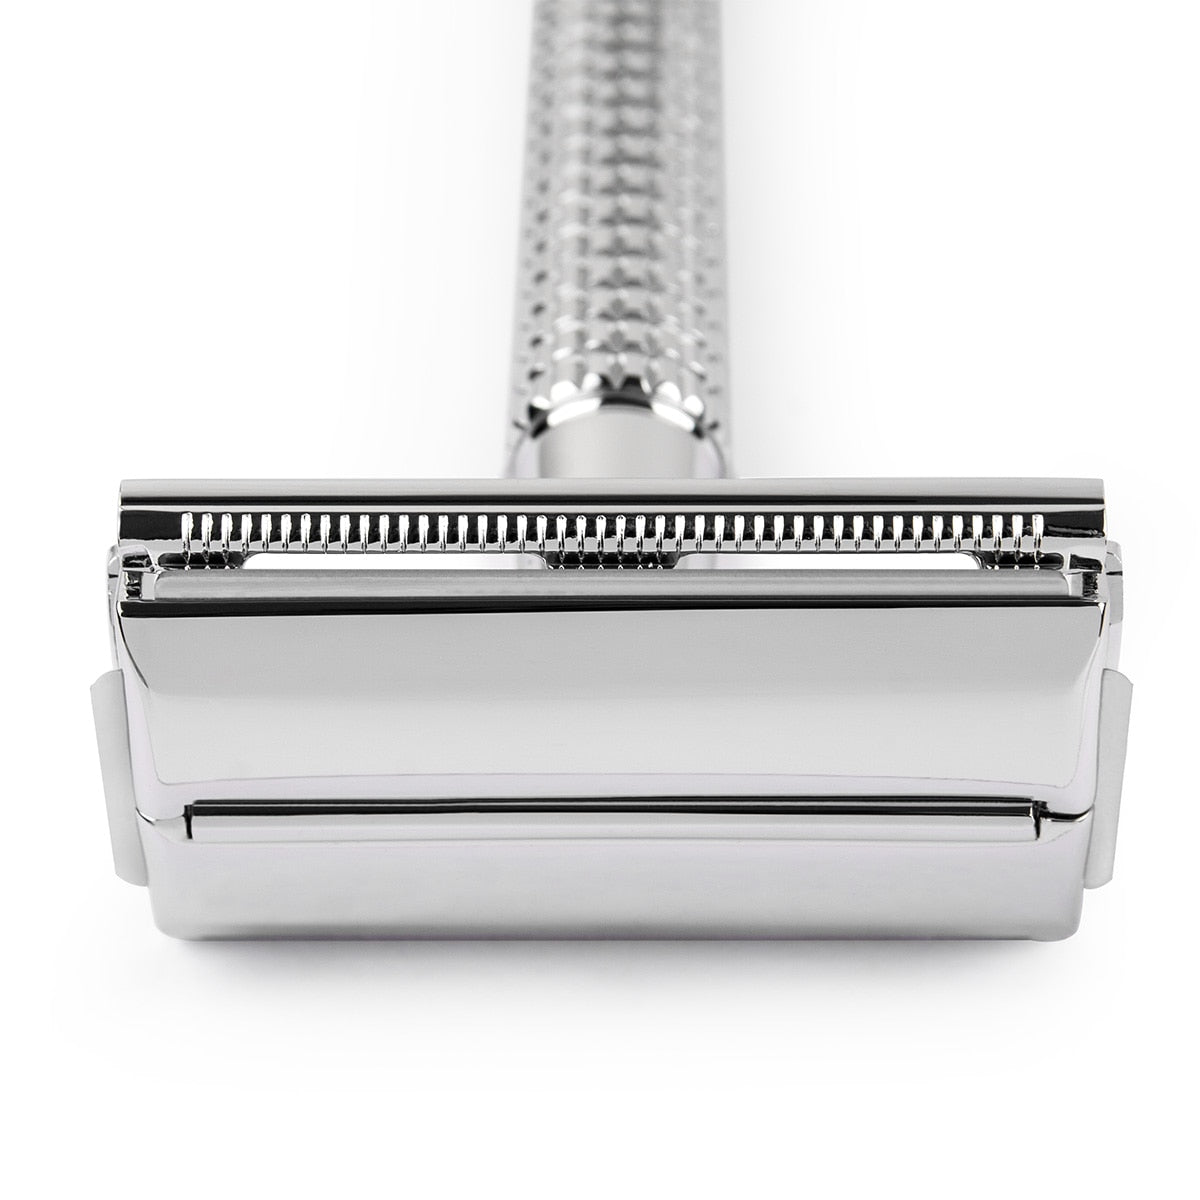 Qshave Double Edge Safety Razor Long Handle Butterfly Open Classic Safety Razor silver color, 1 Handle & 5 blades - HAB 